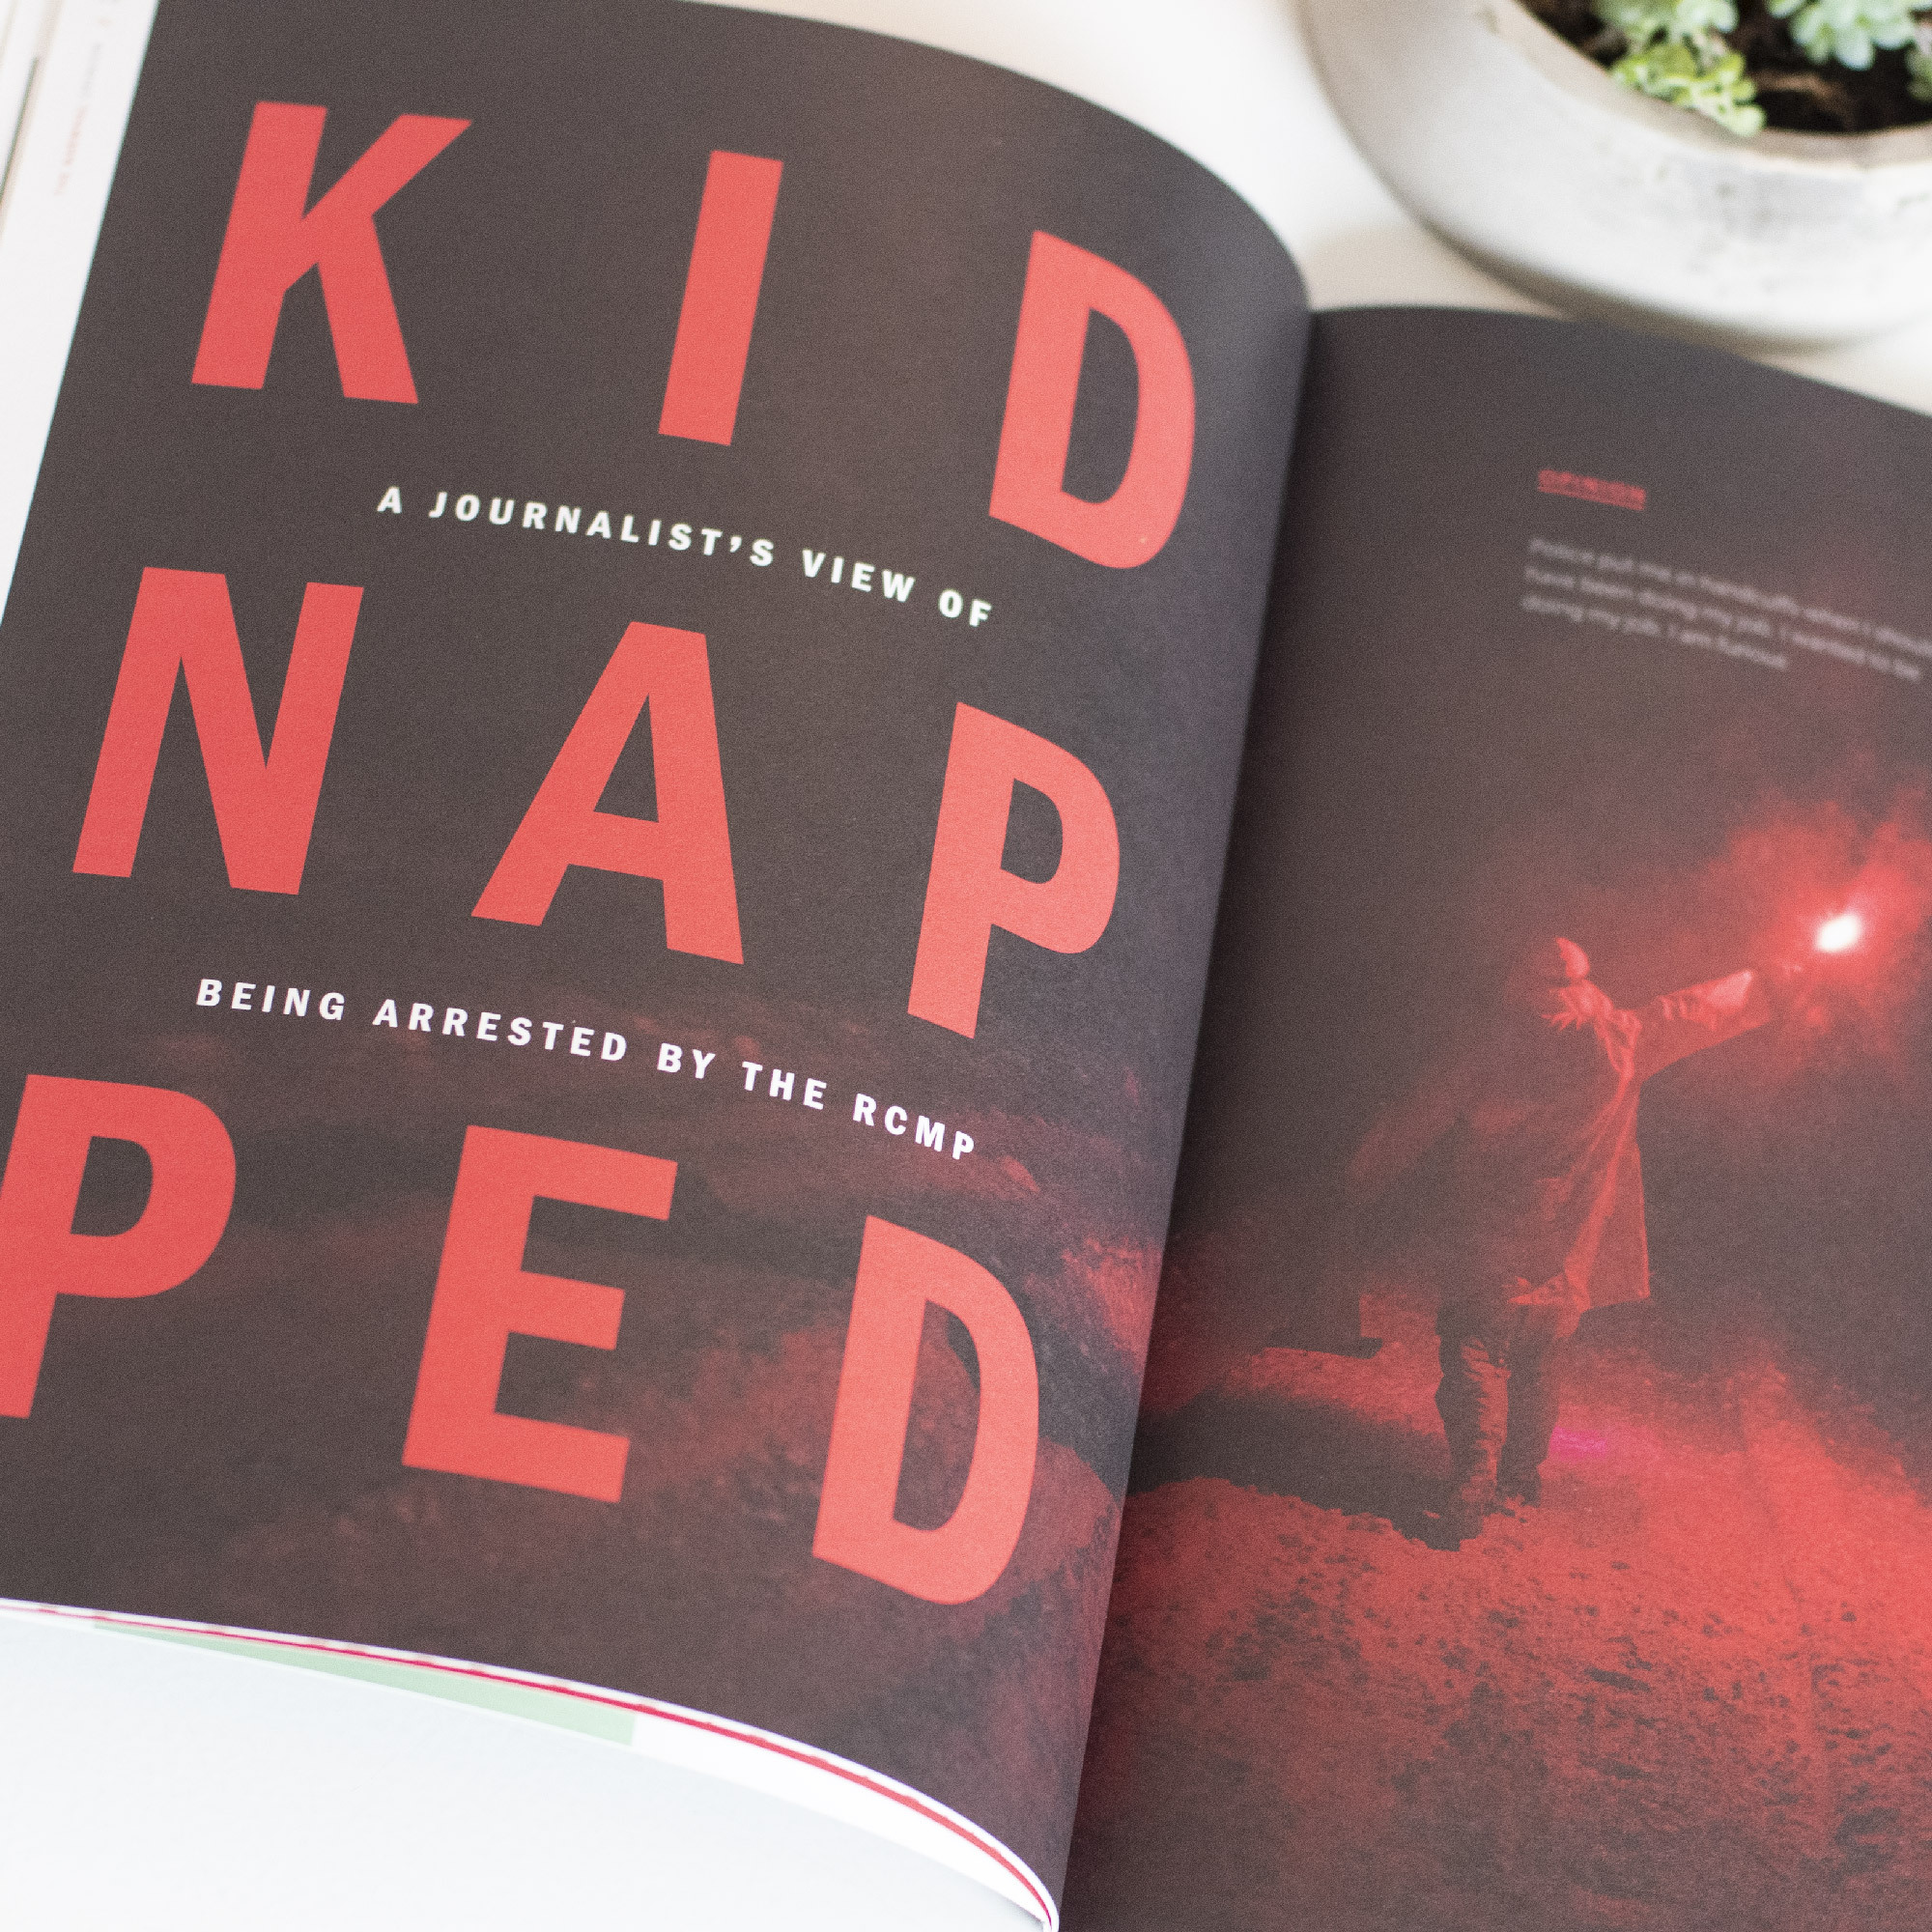 A spread from our print edition: "Kidnapped: a journalist's view of being arrested by the RCMP."